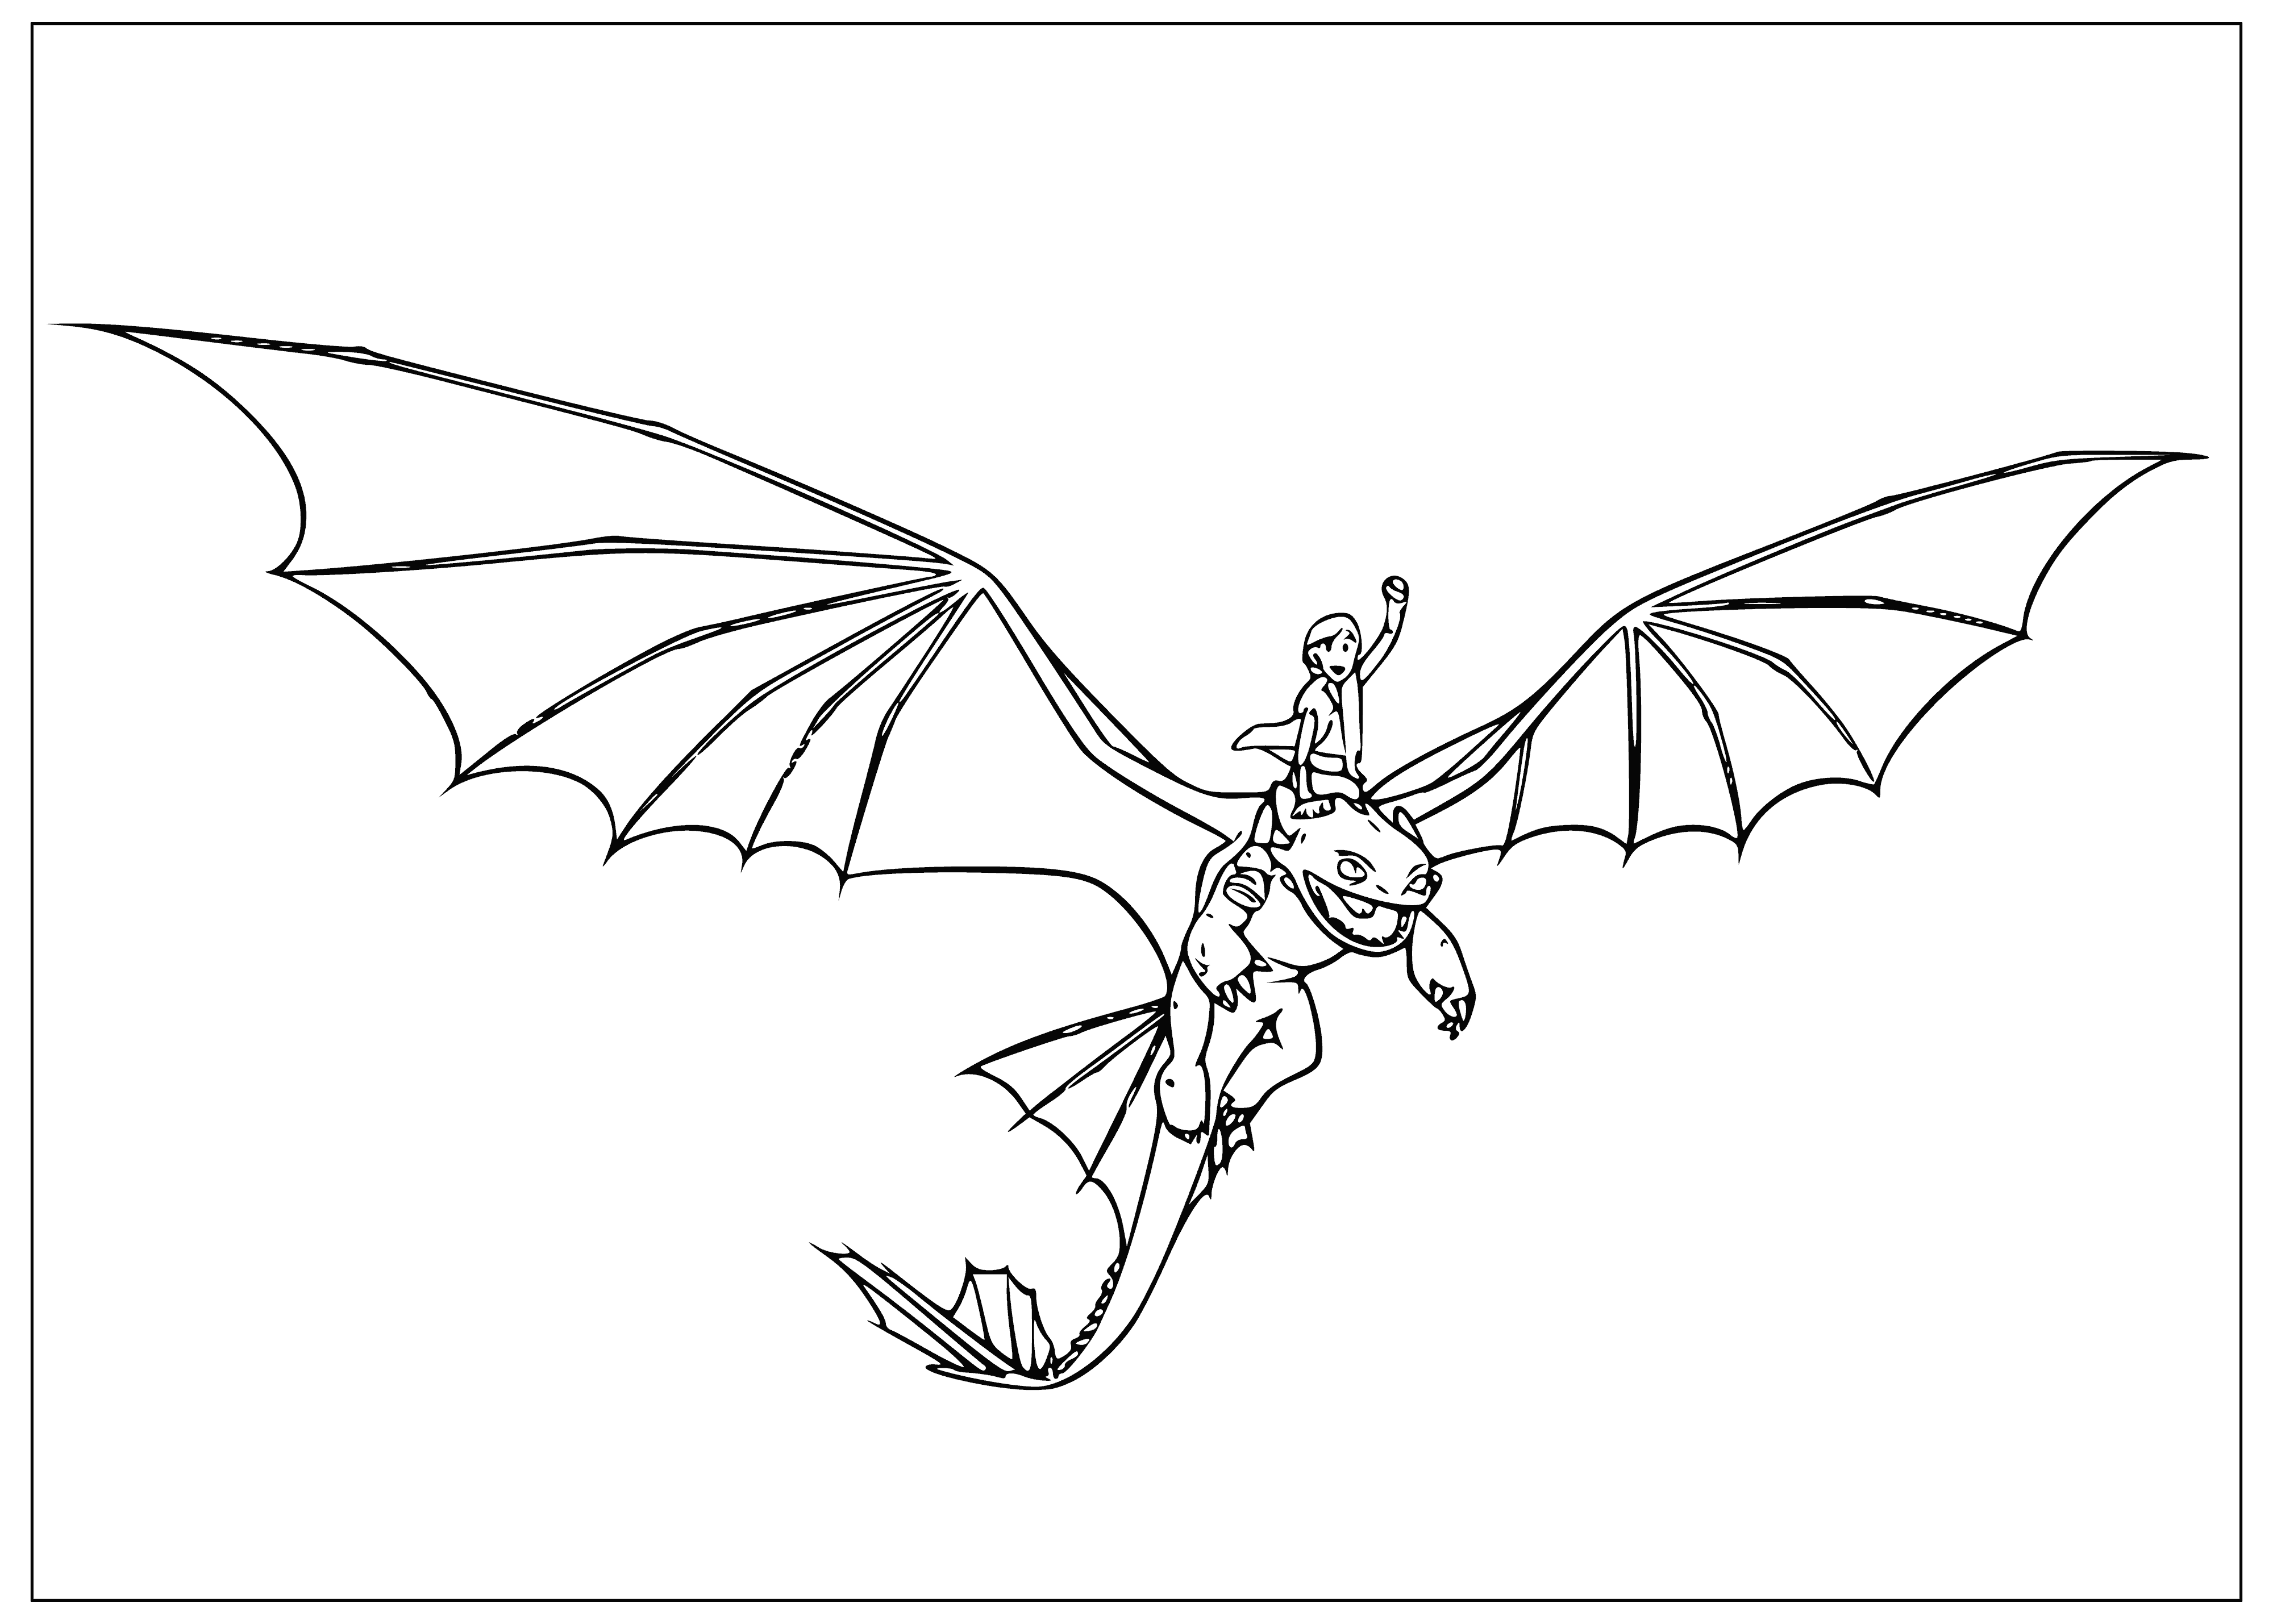 How to train your dragon coloring page